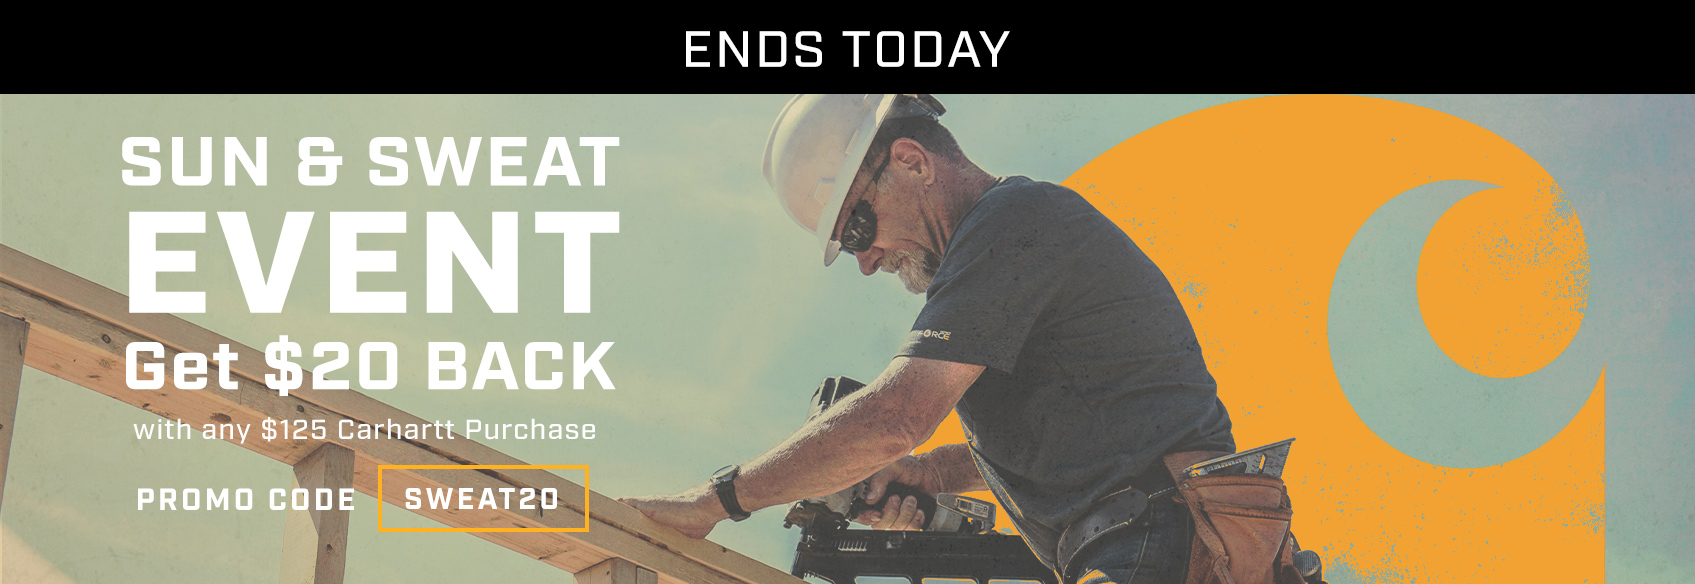 Get $20 Back on Carhartt with Code SWEAT20